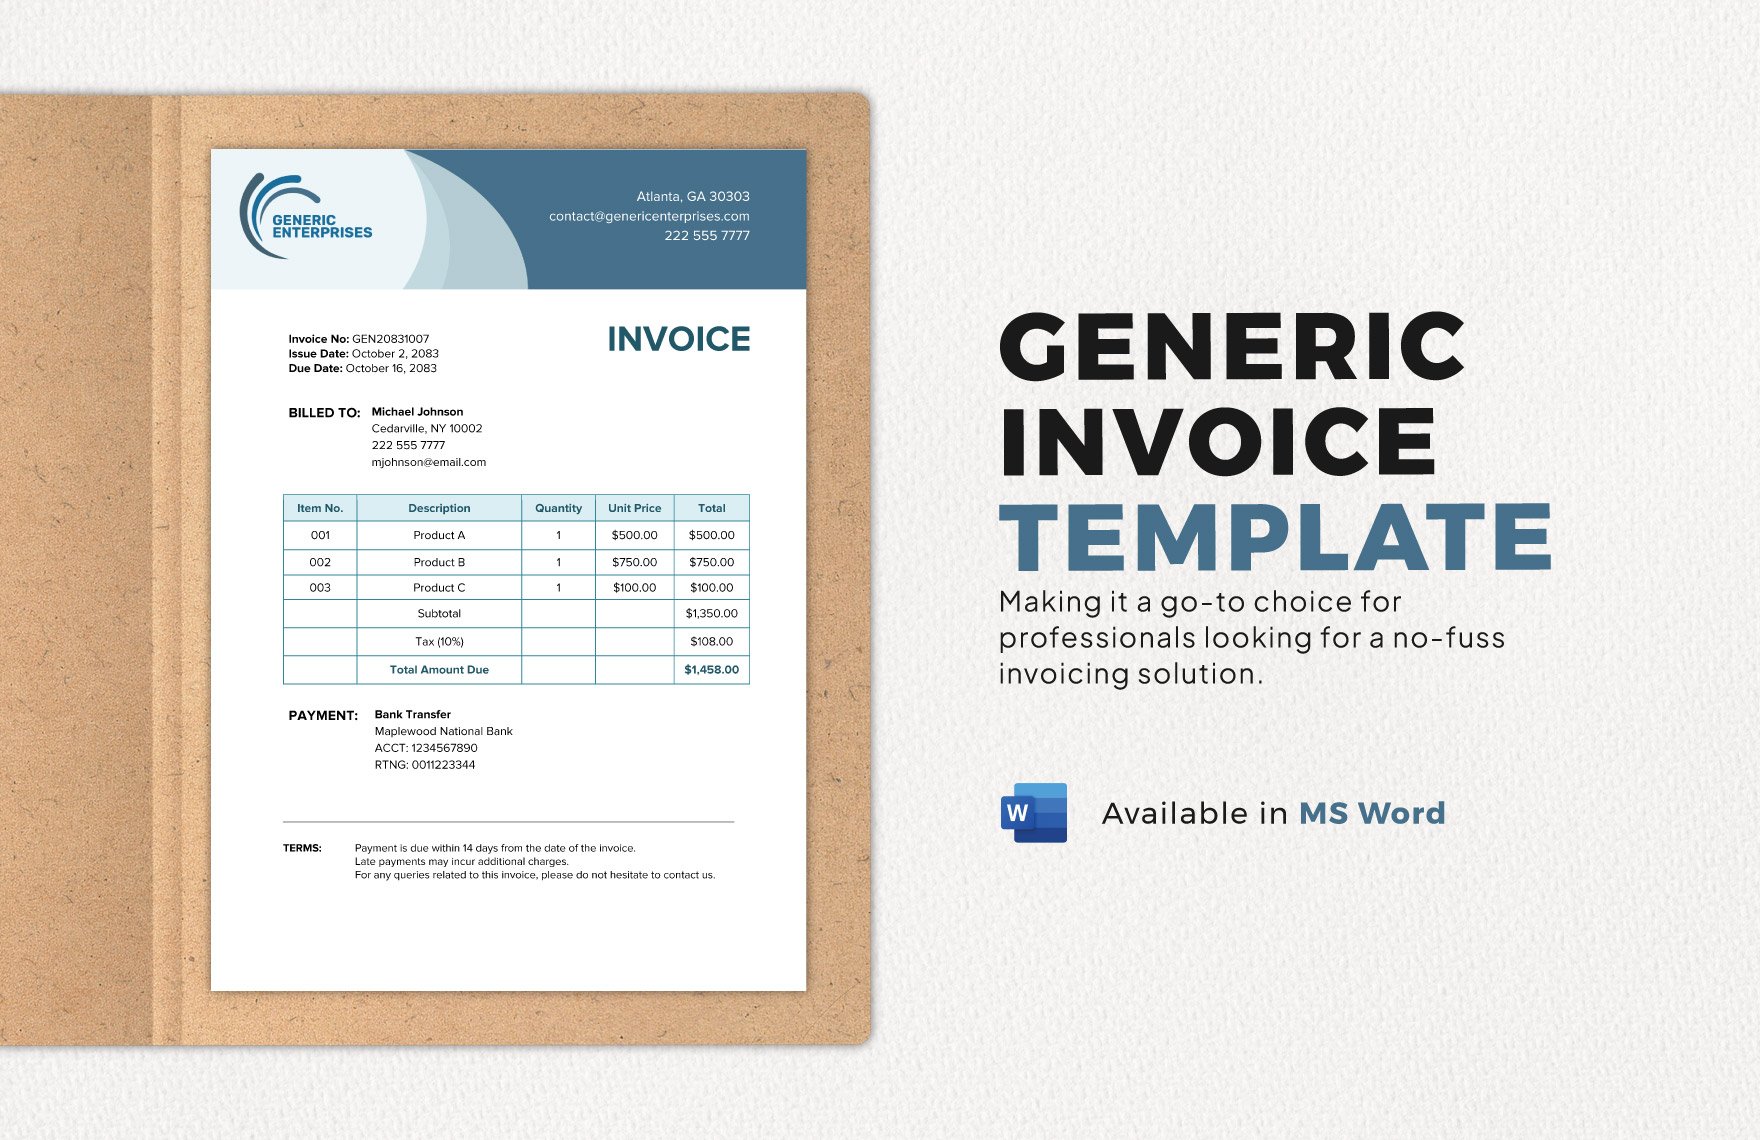 Generic Invoice Template in Word